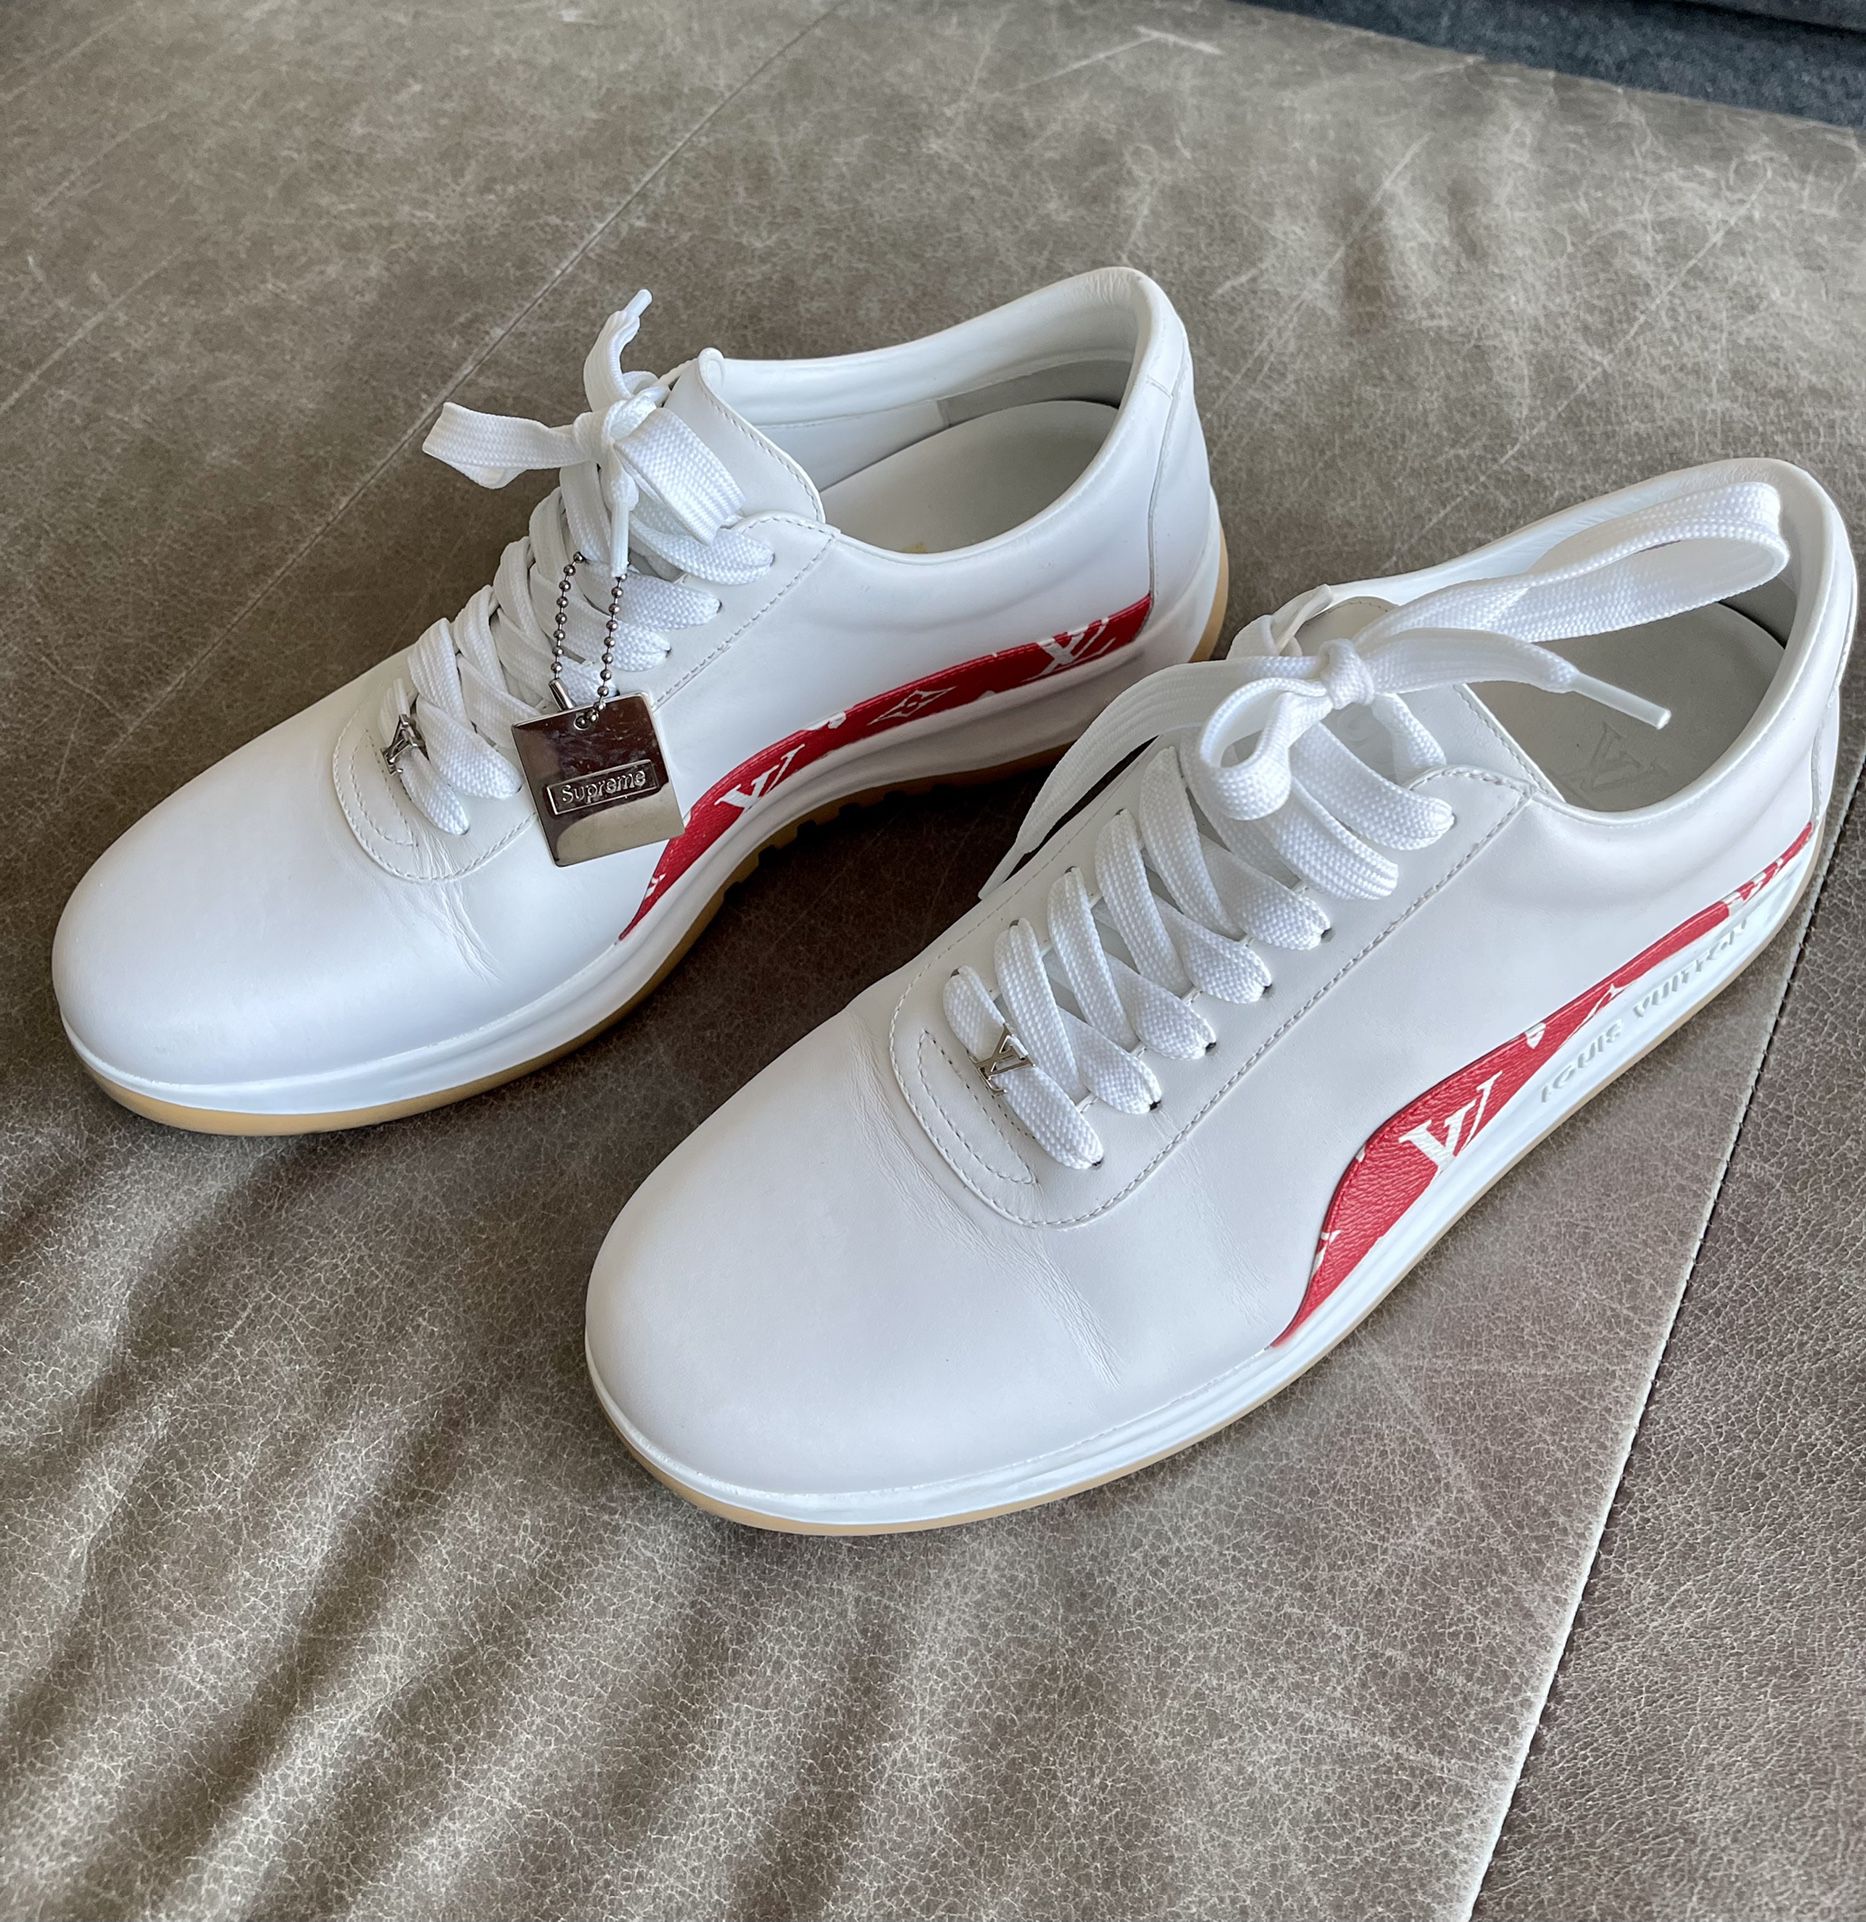 Louis Vuitton Sneakers, Lv Trainers Limited Edition, Size 12, Brand New for  Sale in Portland, OR - OfferUp